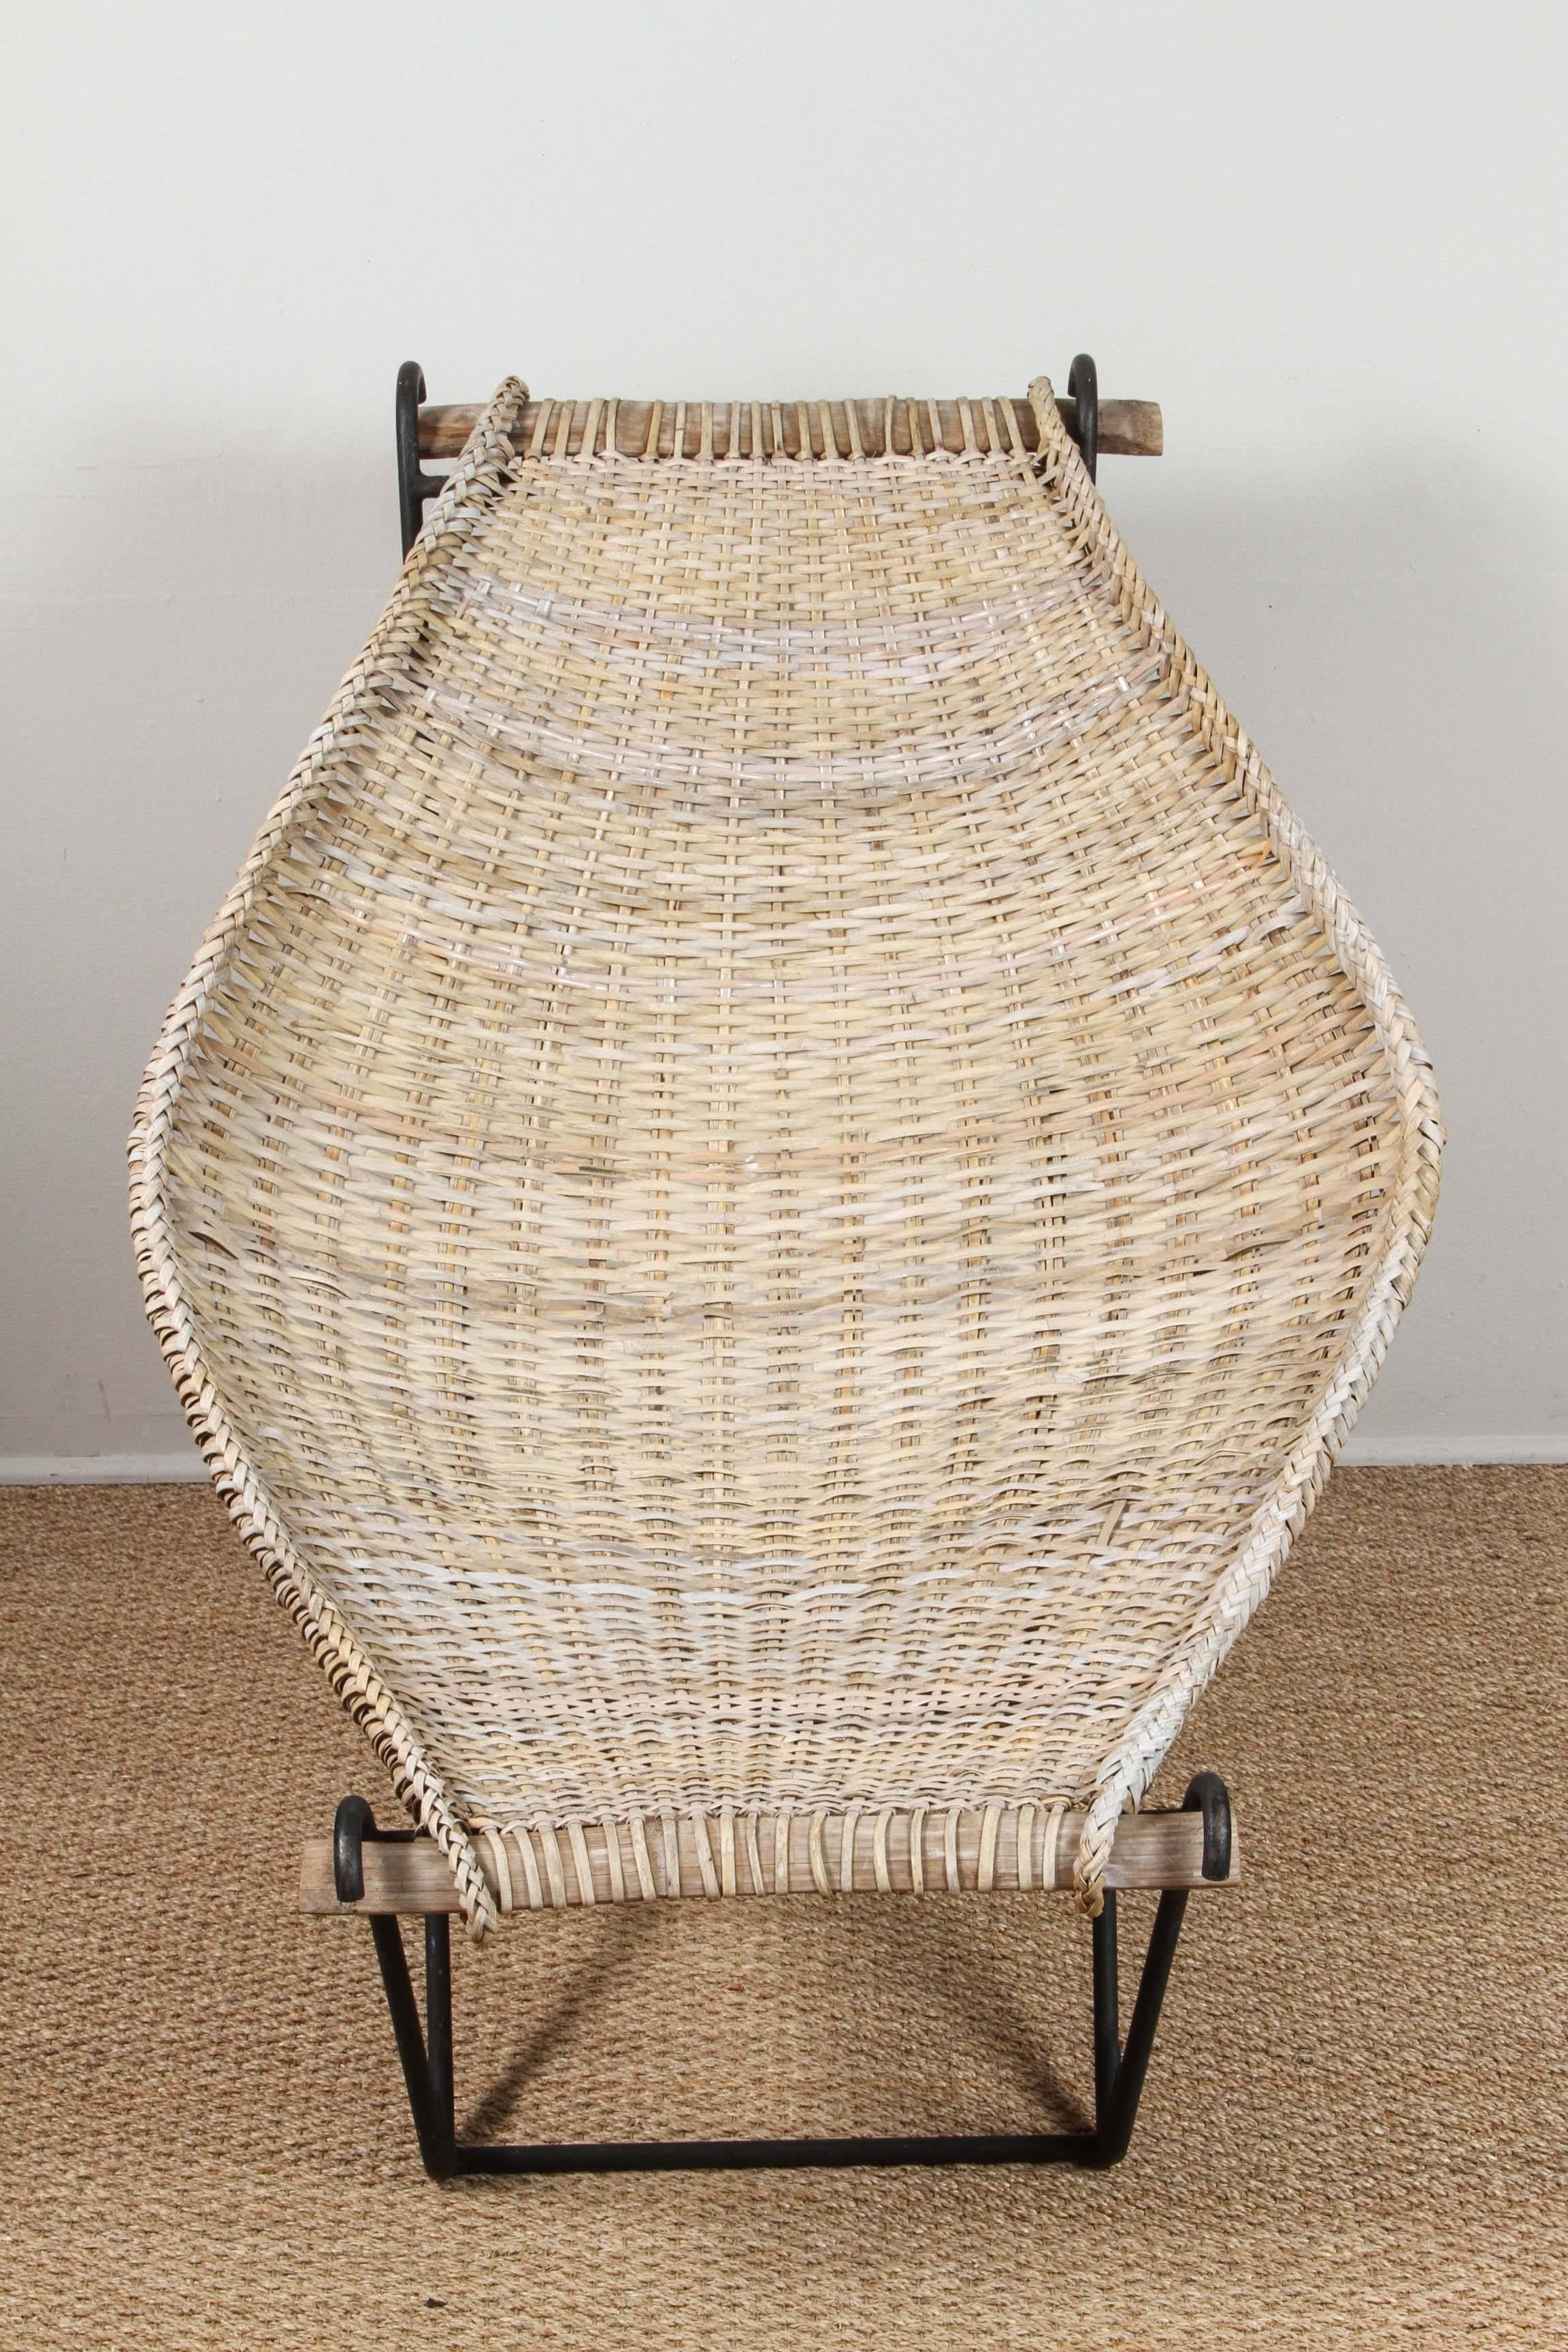 Vintage John Risley chair. 90% original rattan with contemporary rattan added for extra strength.